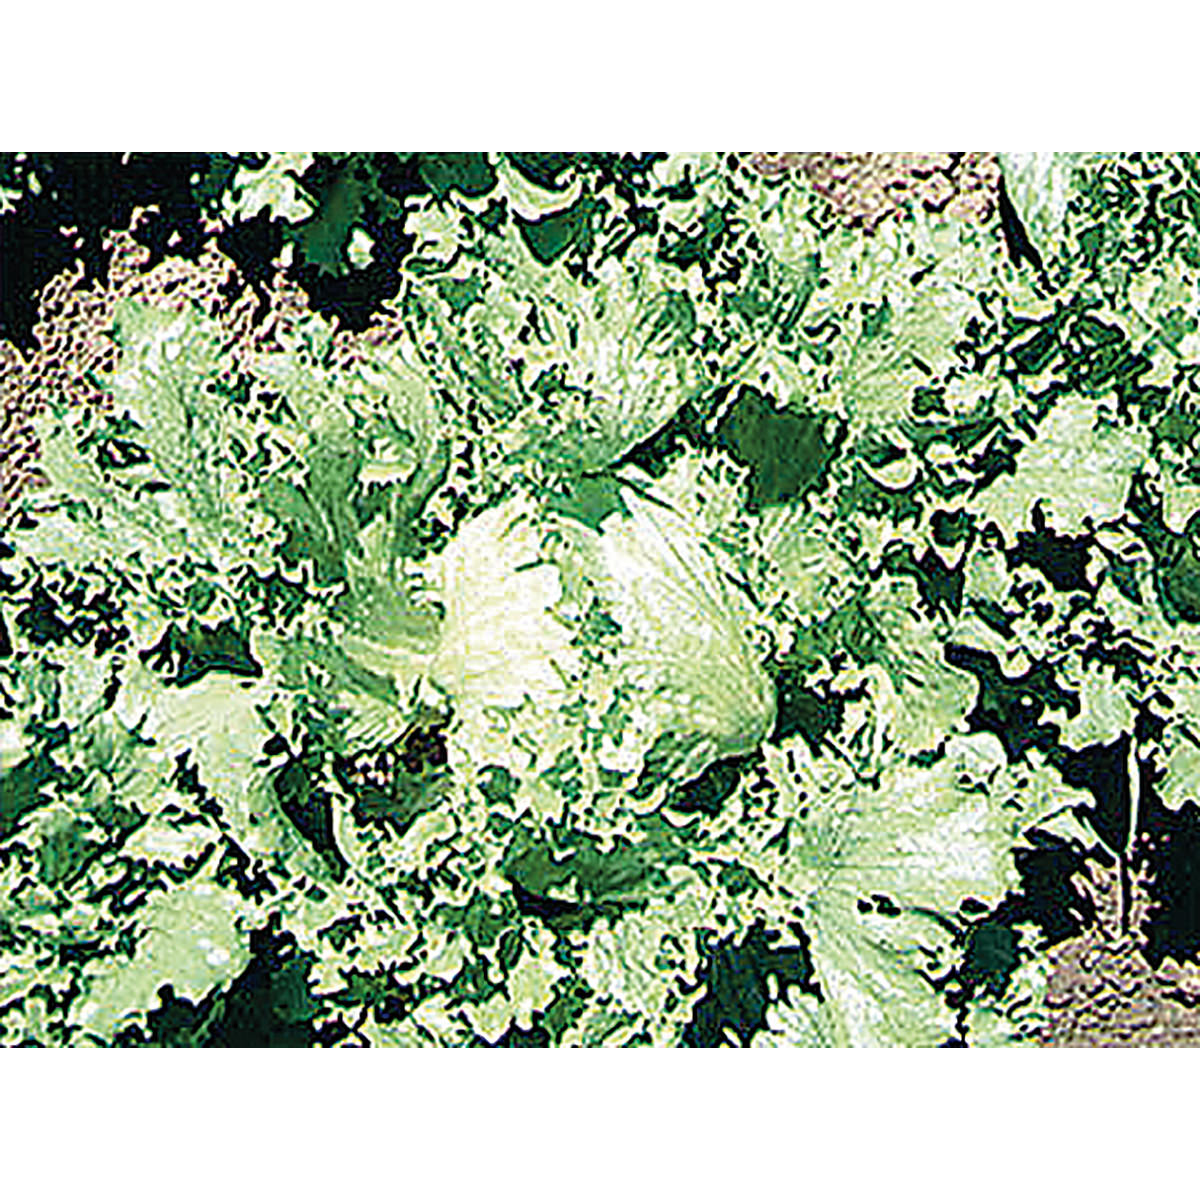 Great Lakes 659 Lettuce Seeds